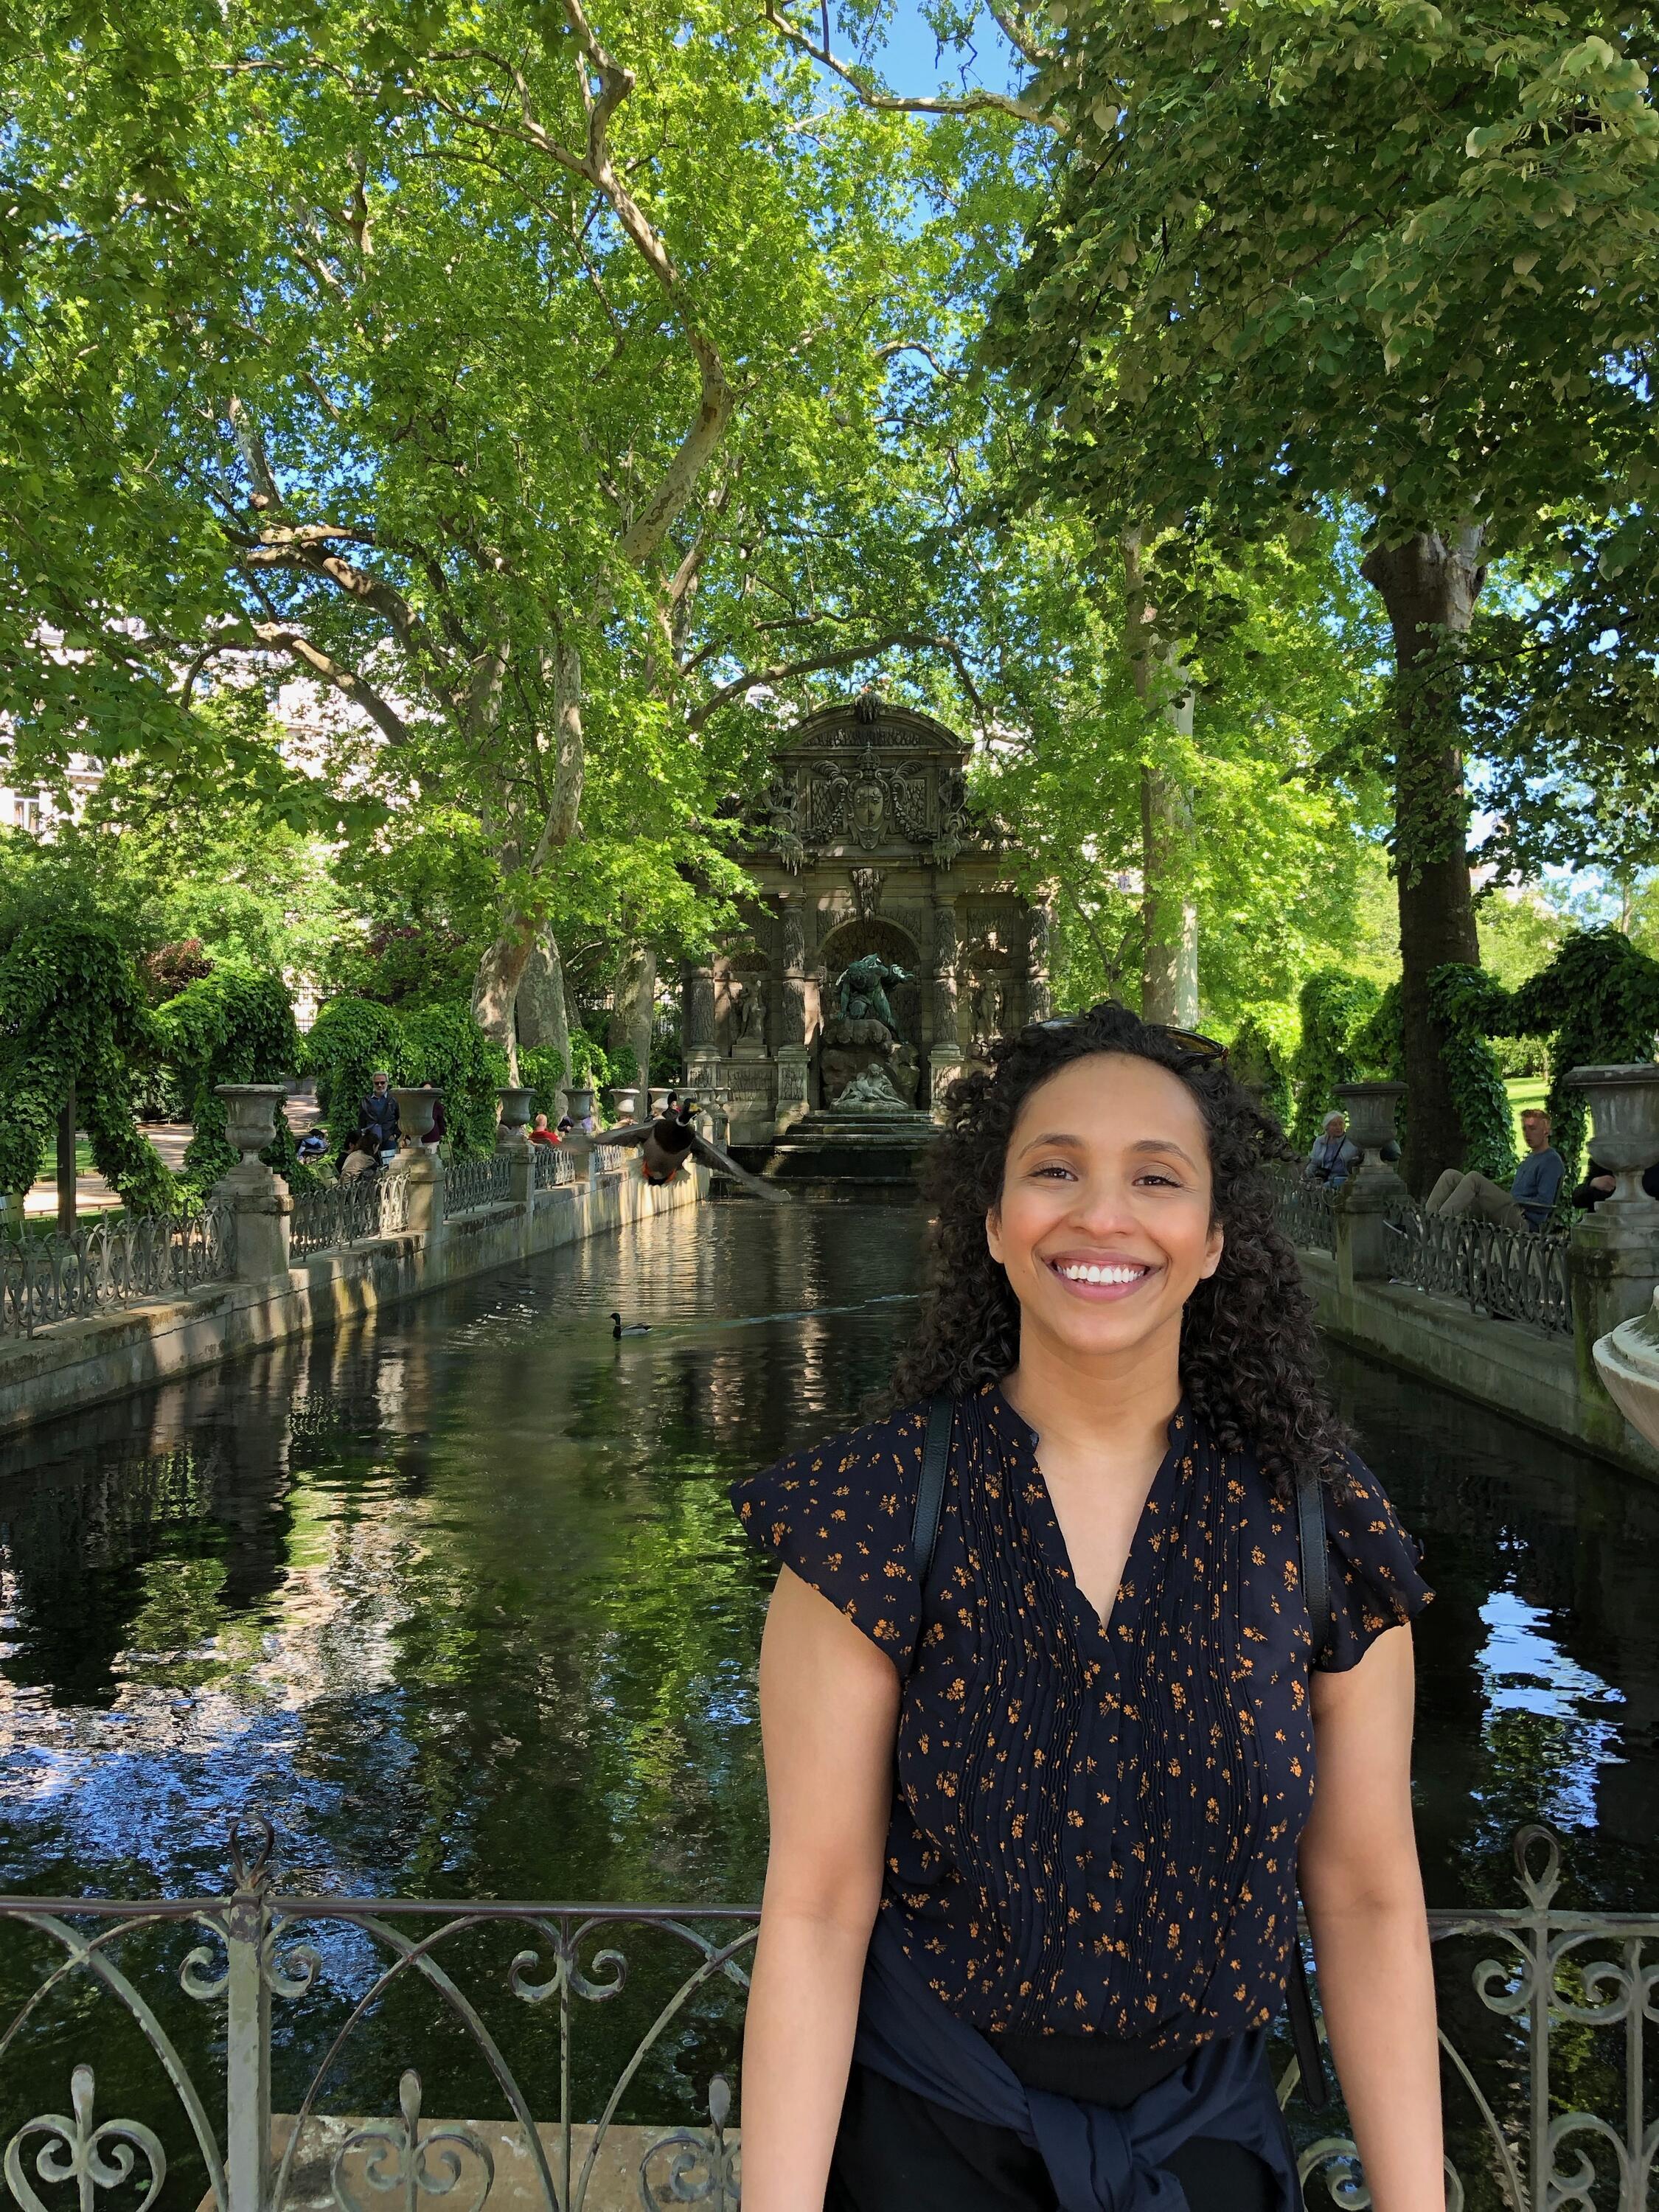 Nasra Smith in front of a fountain surrounded by trees